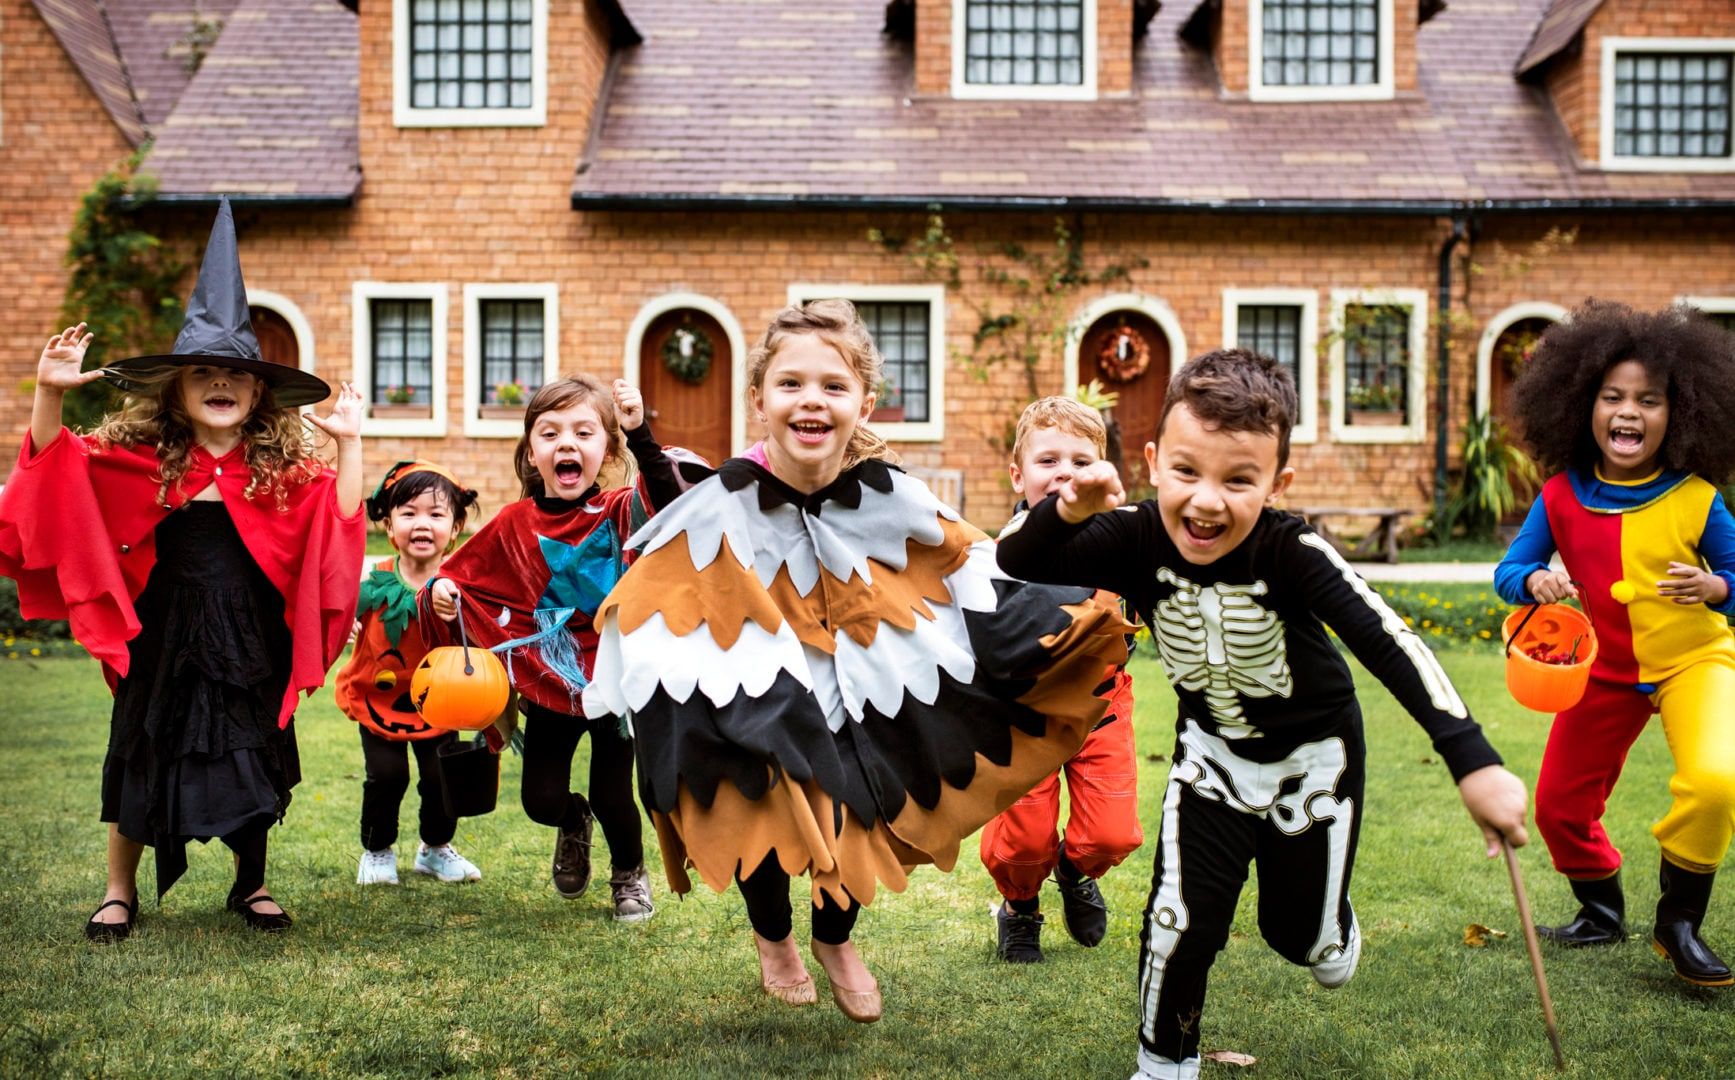 24 Halloween party themes - Care.com Resources